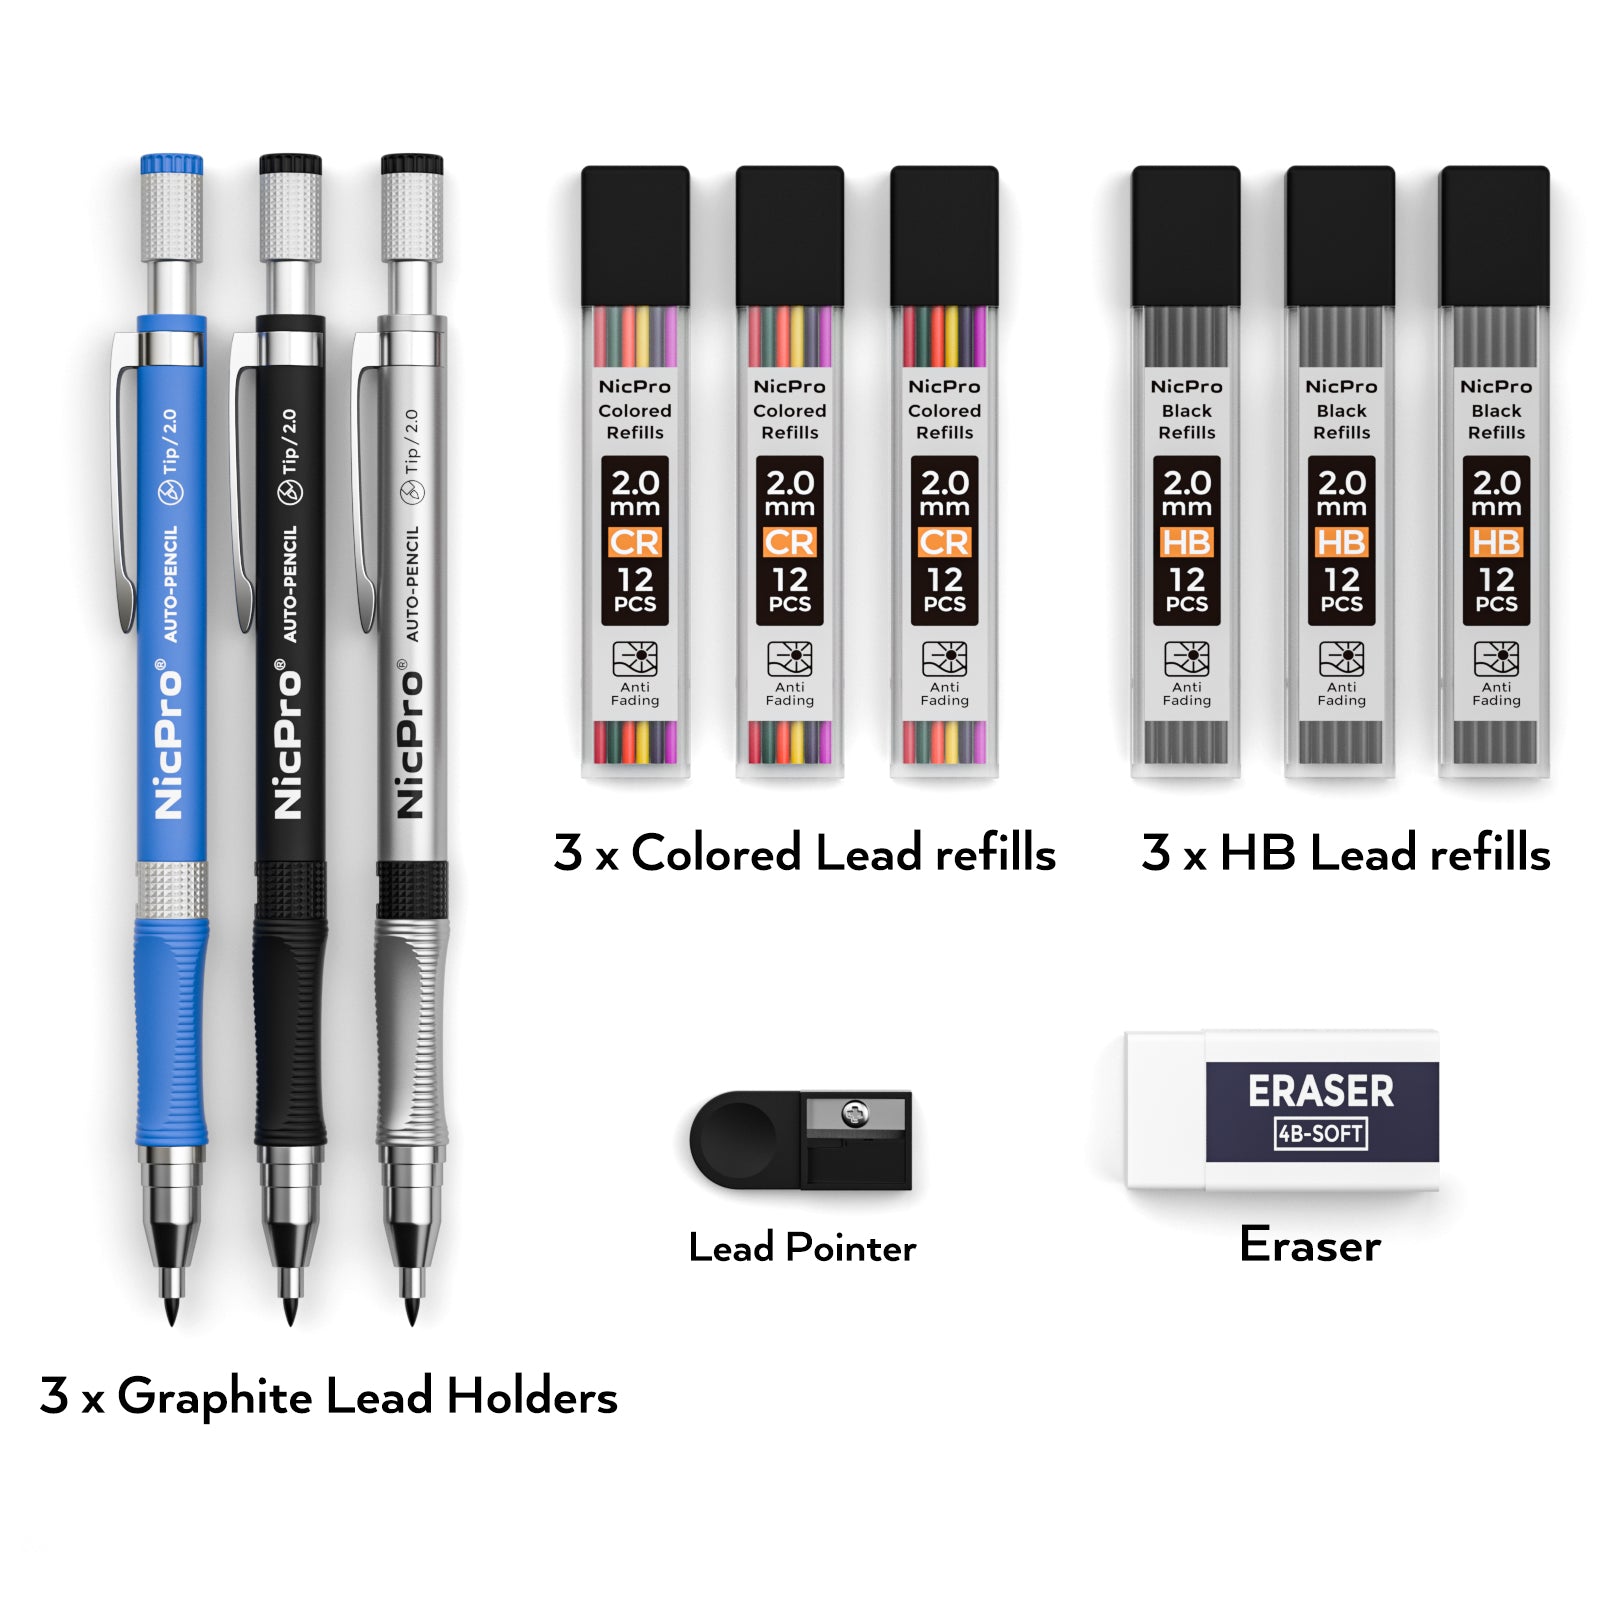 Nicpro 11 Pieces Colors 2mm Mechanical Pencil Set, 3 PCS Carpenter Drafting Pencil 2.0 mm for Art Drawing Writing Sketching Construction with 6 Tube Pre-Sharpen 2B & Color Refill, Eraser, Sharpener